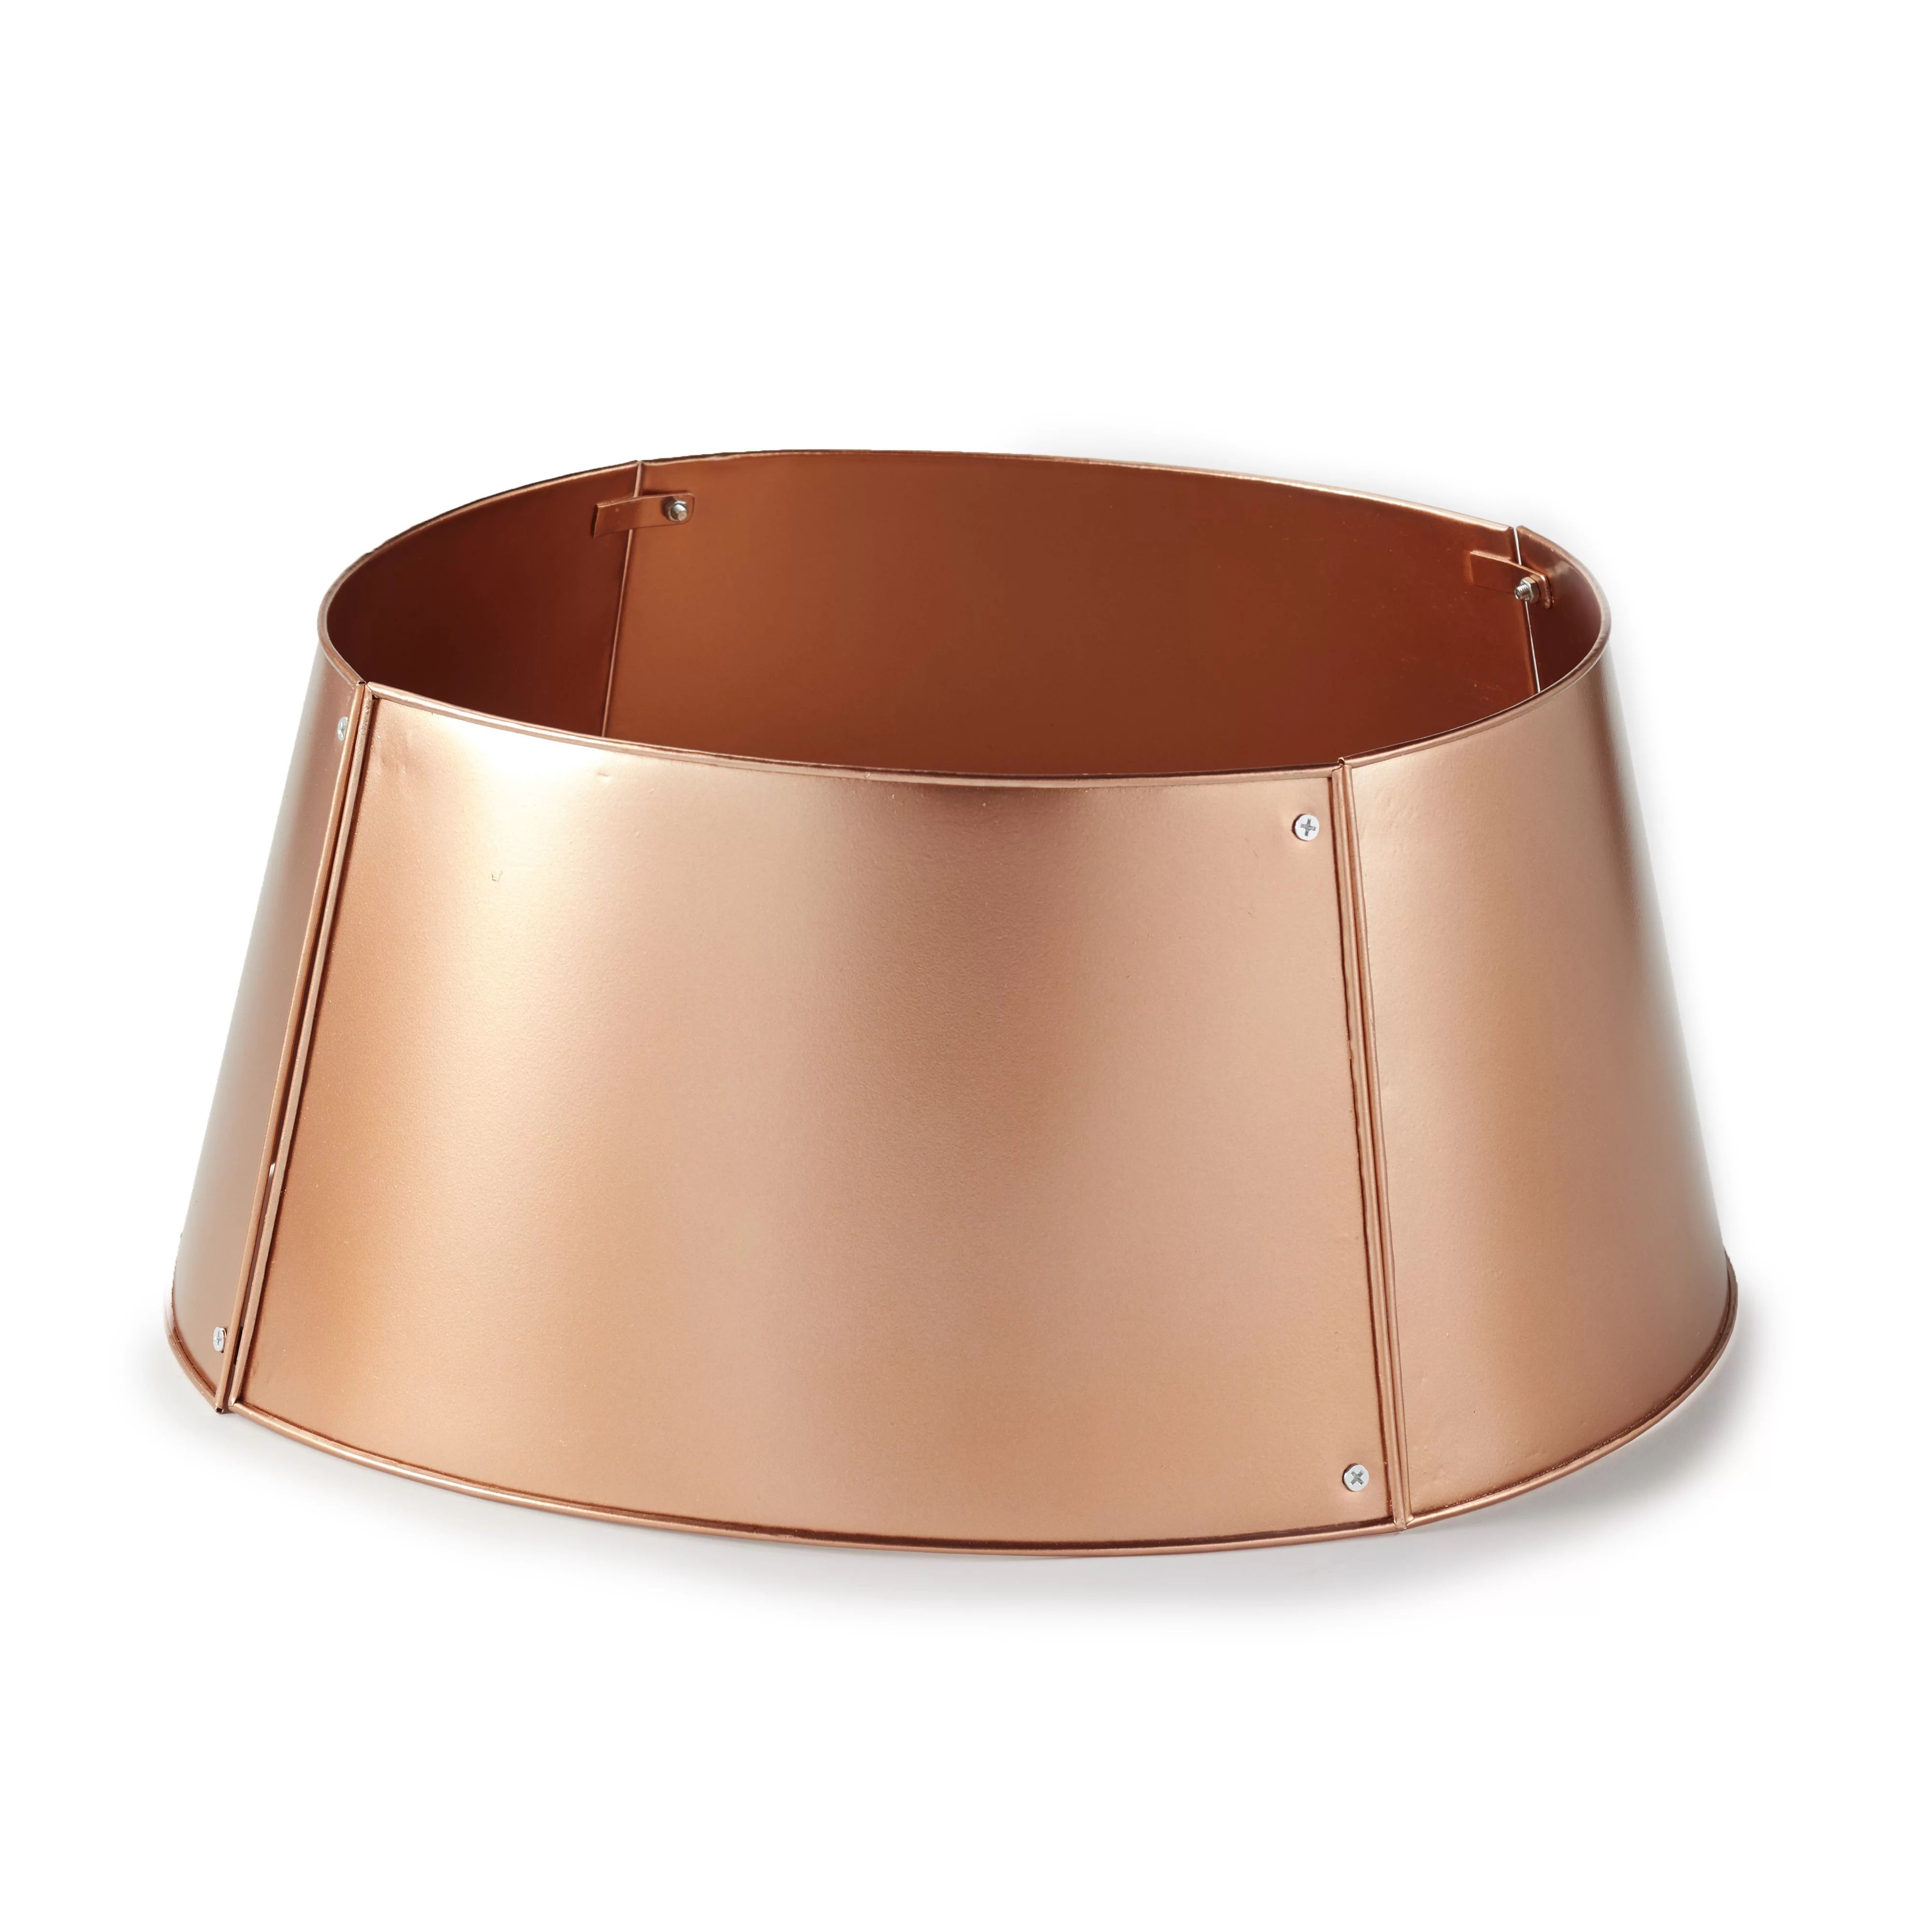 Copper Finish Tree Collar with Round Design for Christmas Tree Base | Walmart (US)